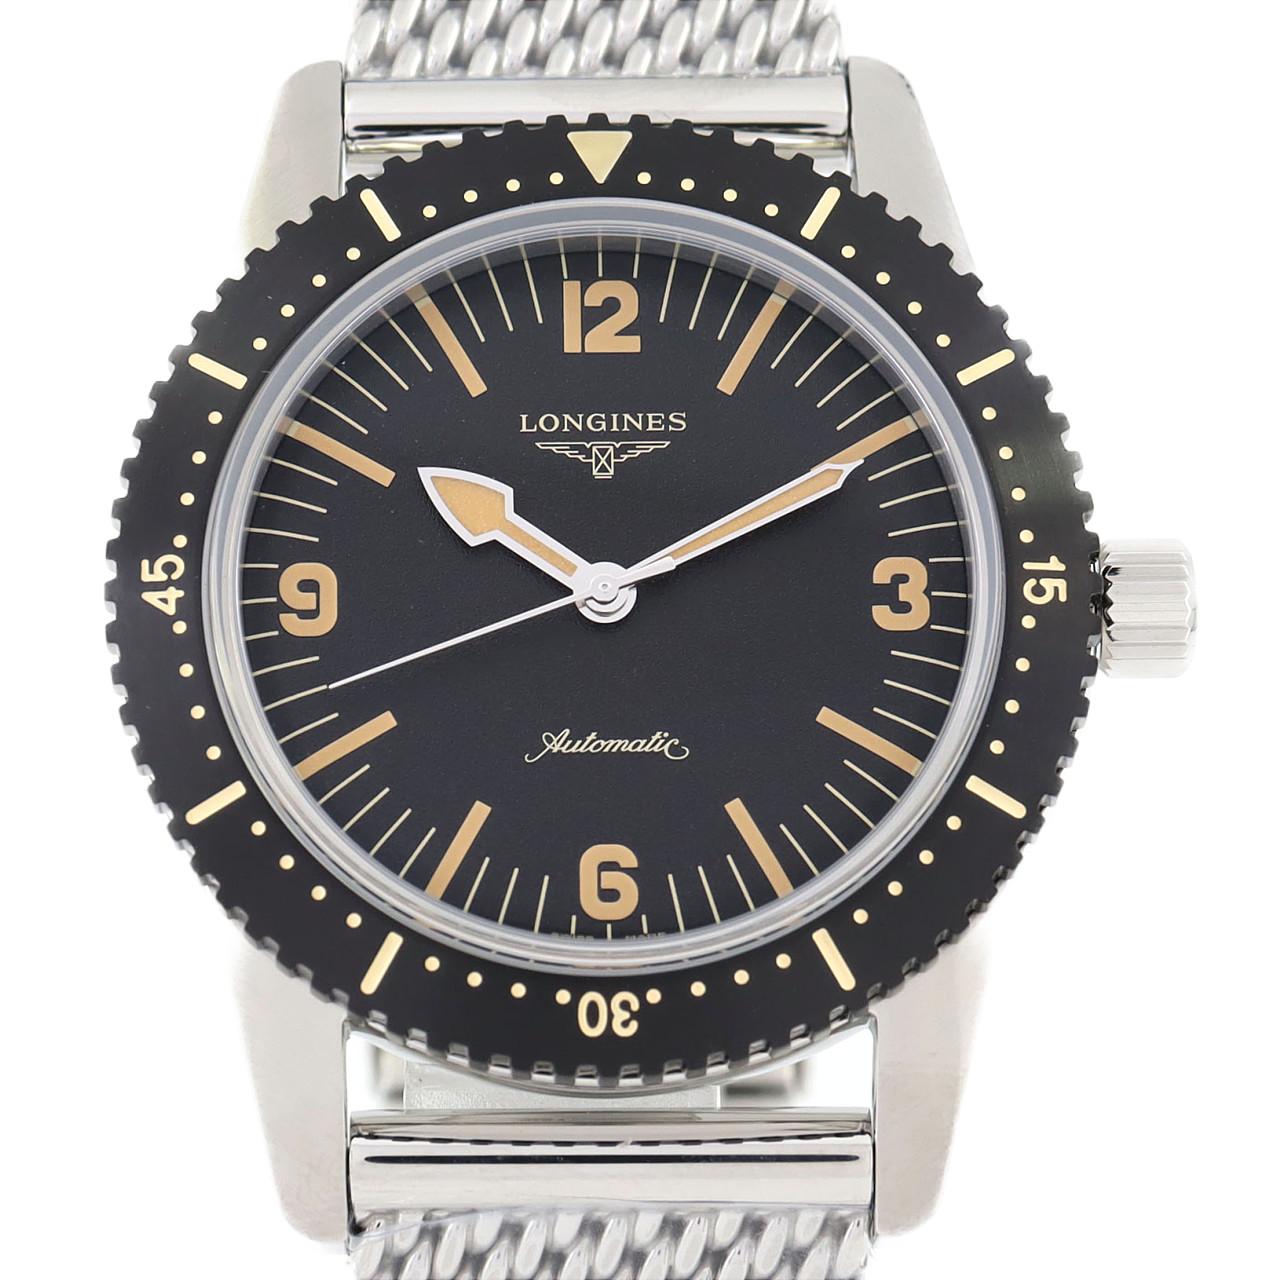 [BRAND NEW] LONGINES Skin Diver L2.822.4.56.6 SS Automatic